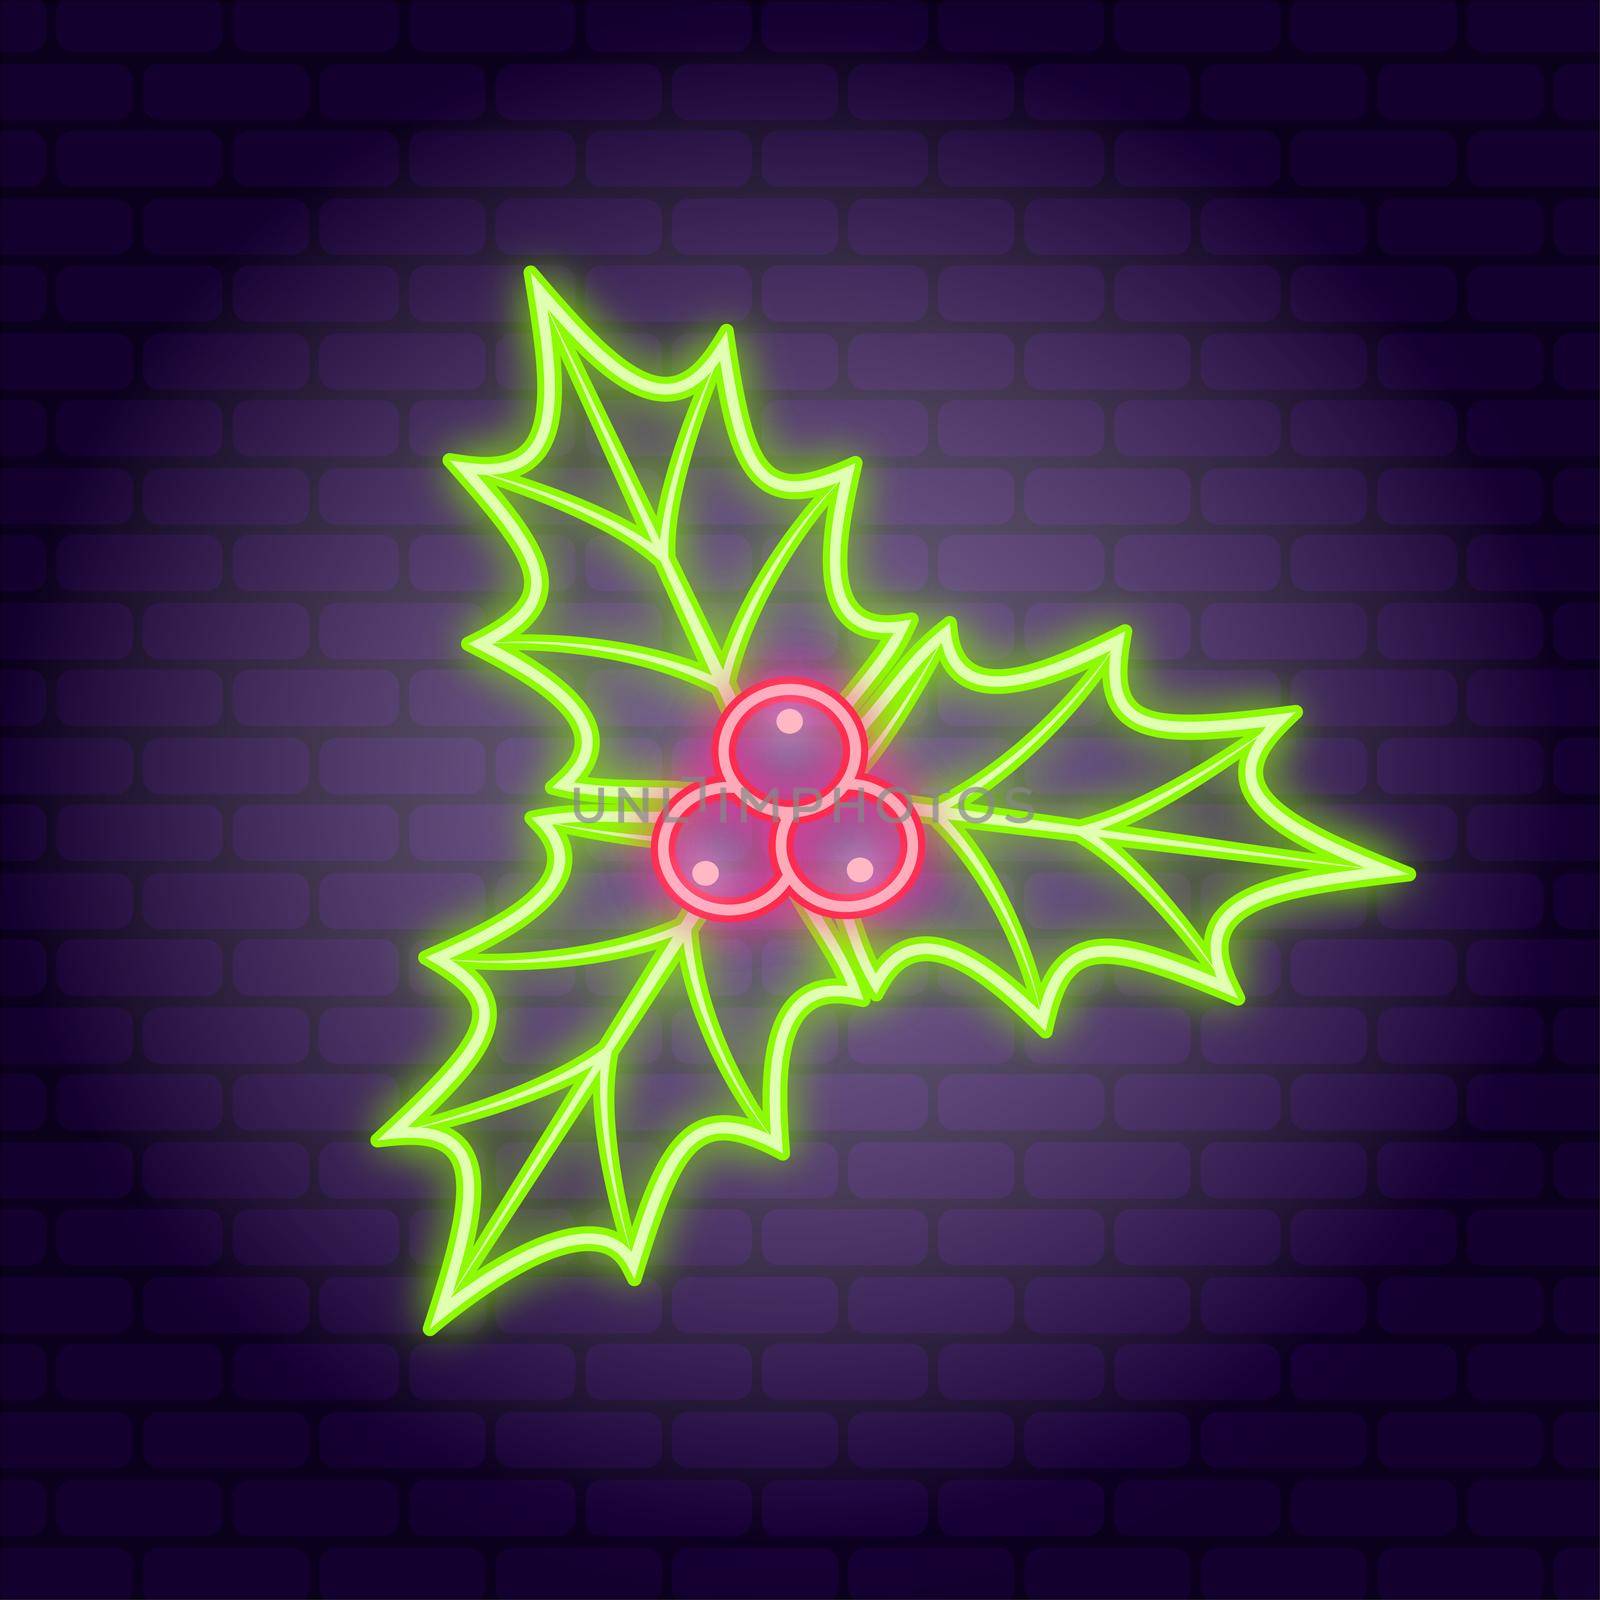 Christmass Holly Berry. Neon illustration on dark brick wall background by Marin4ik